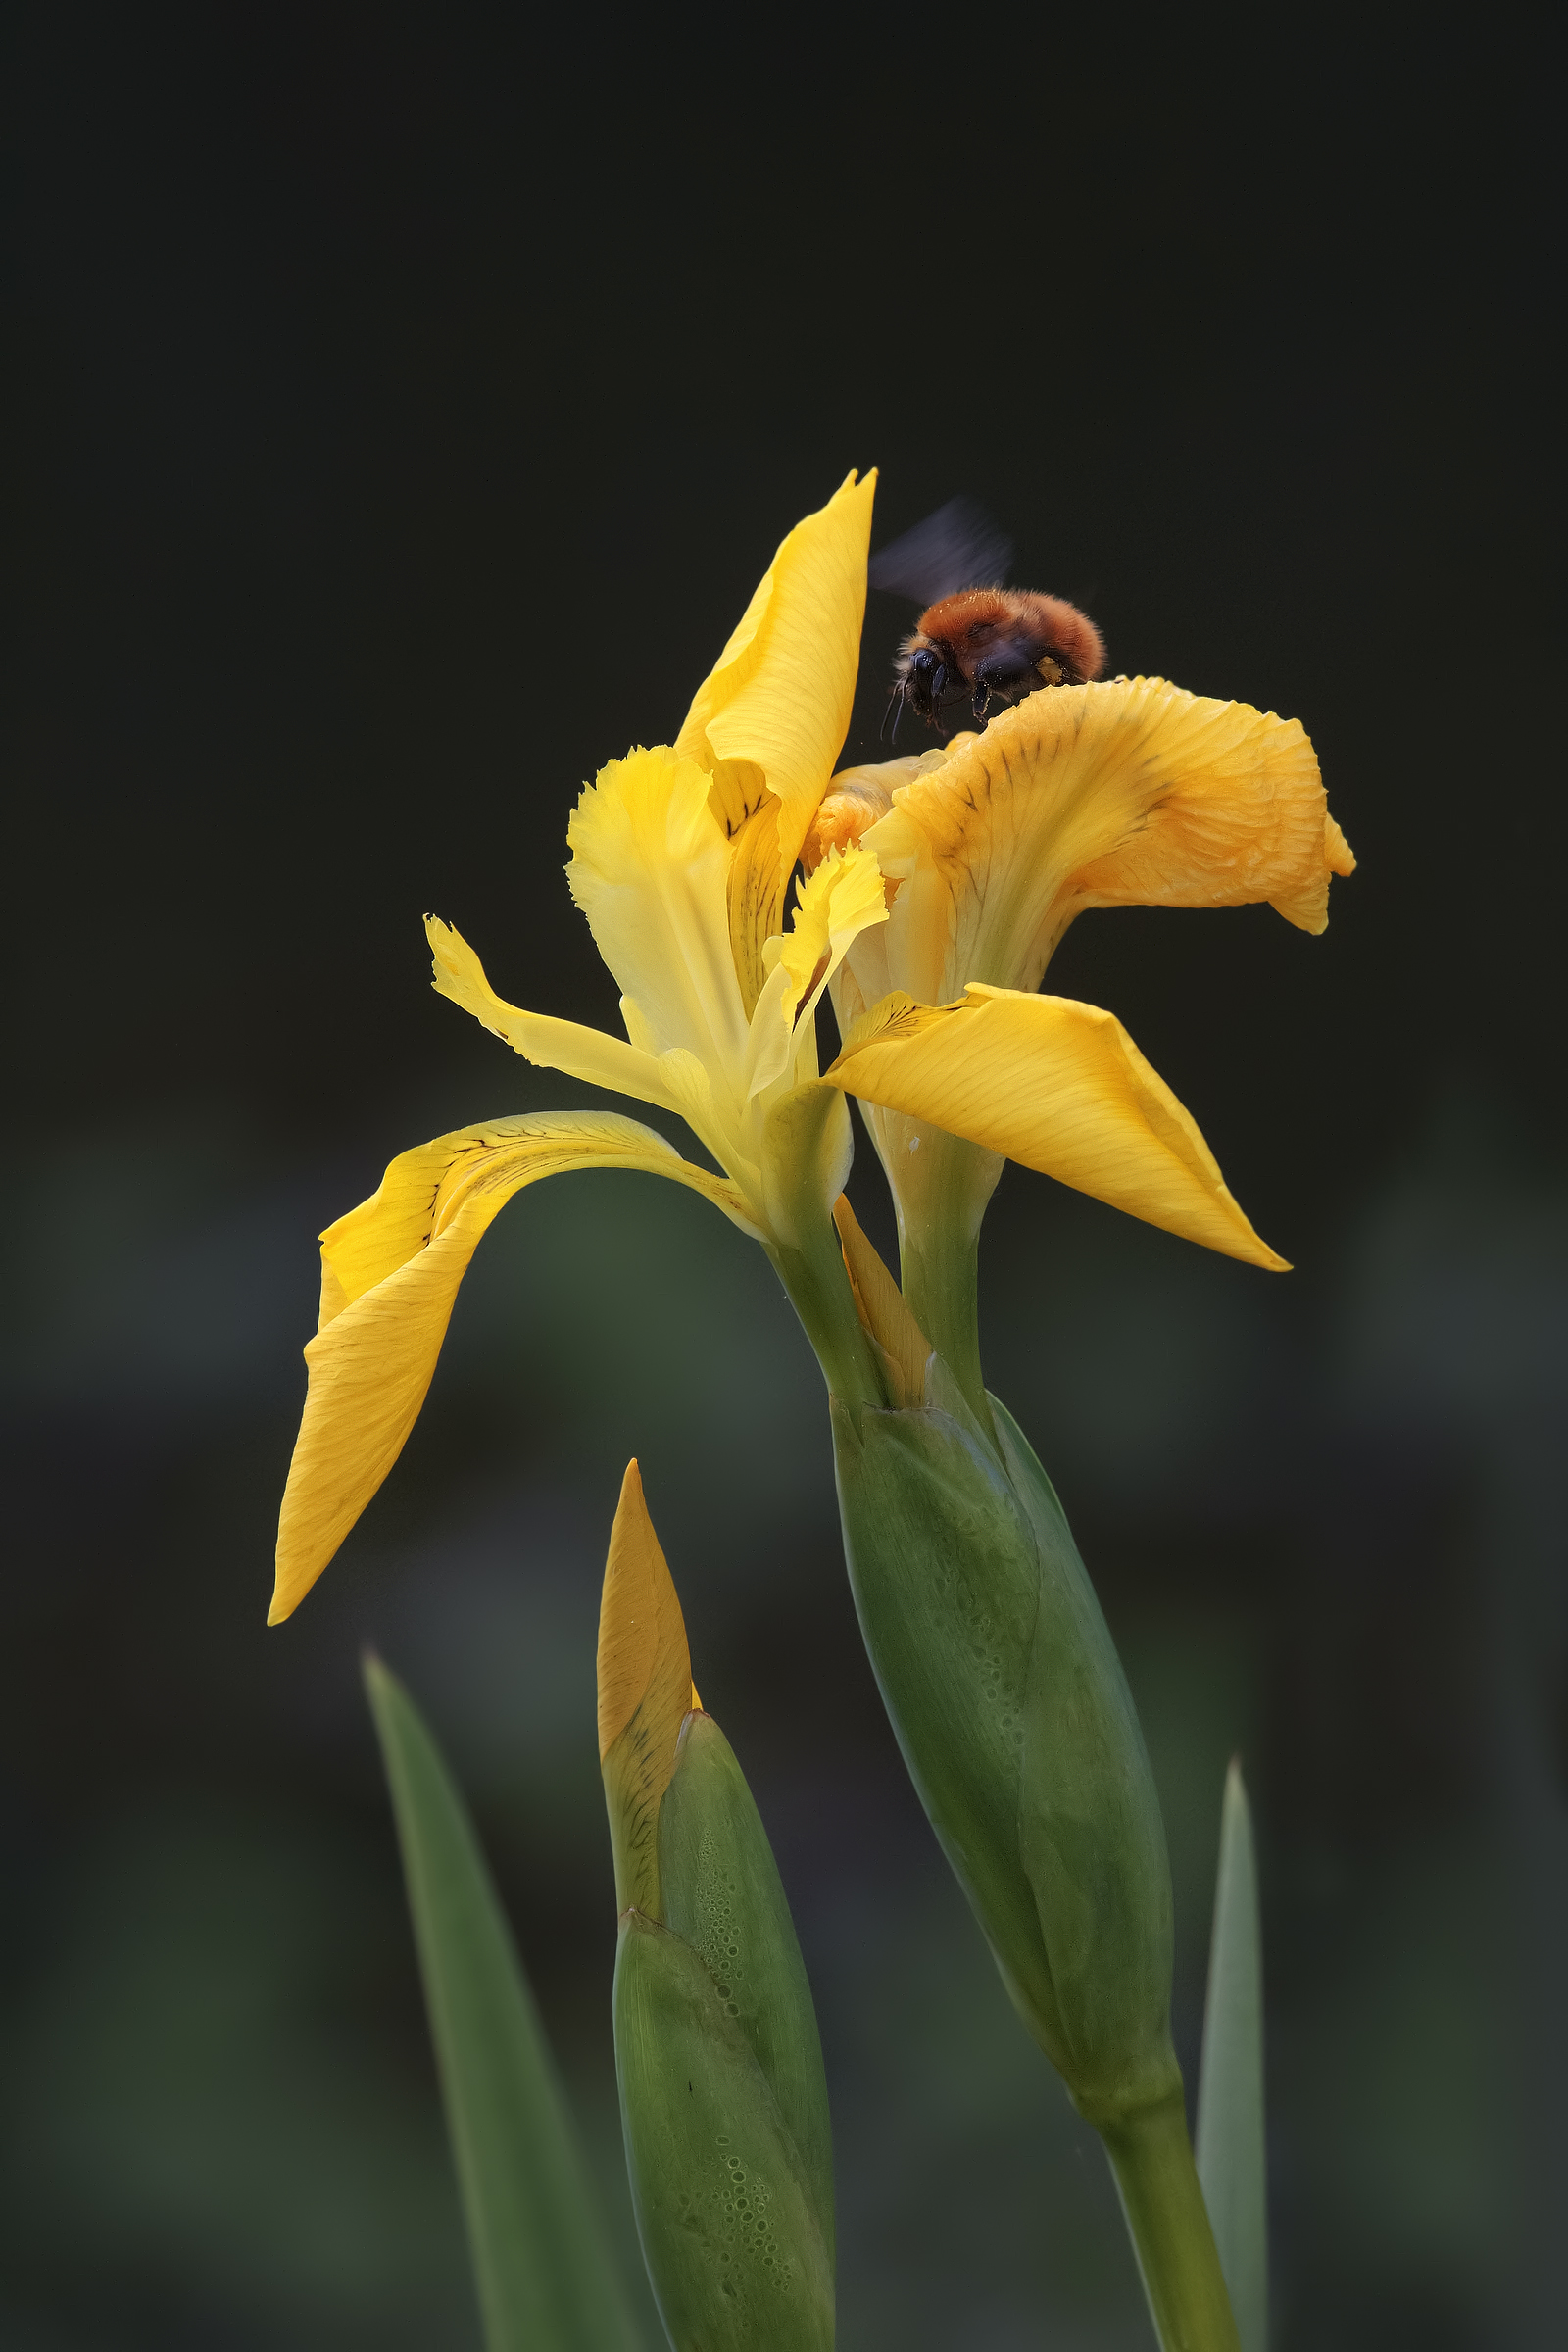 Iris and insect...